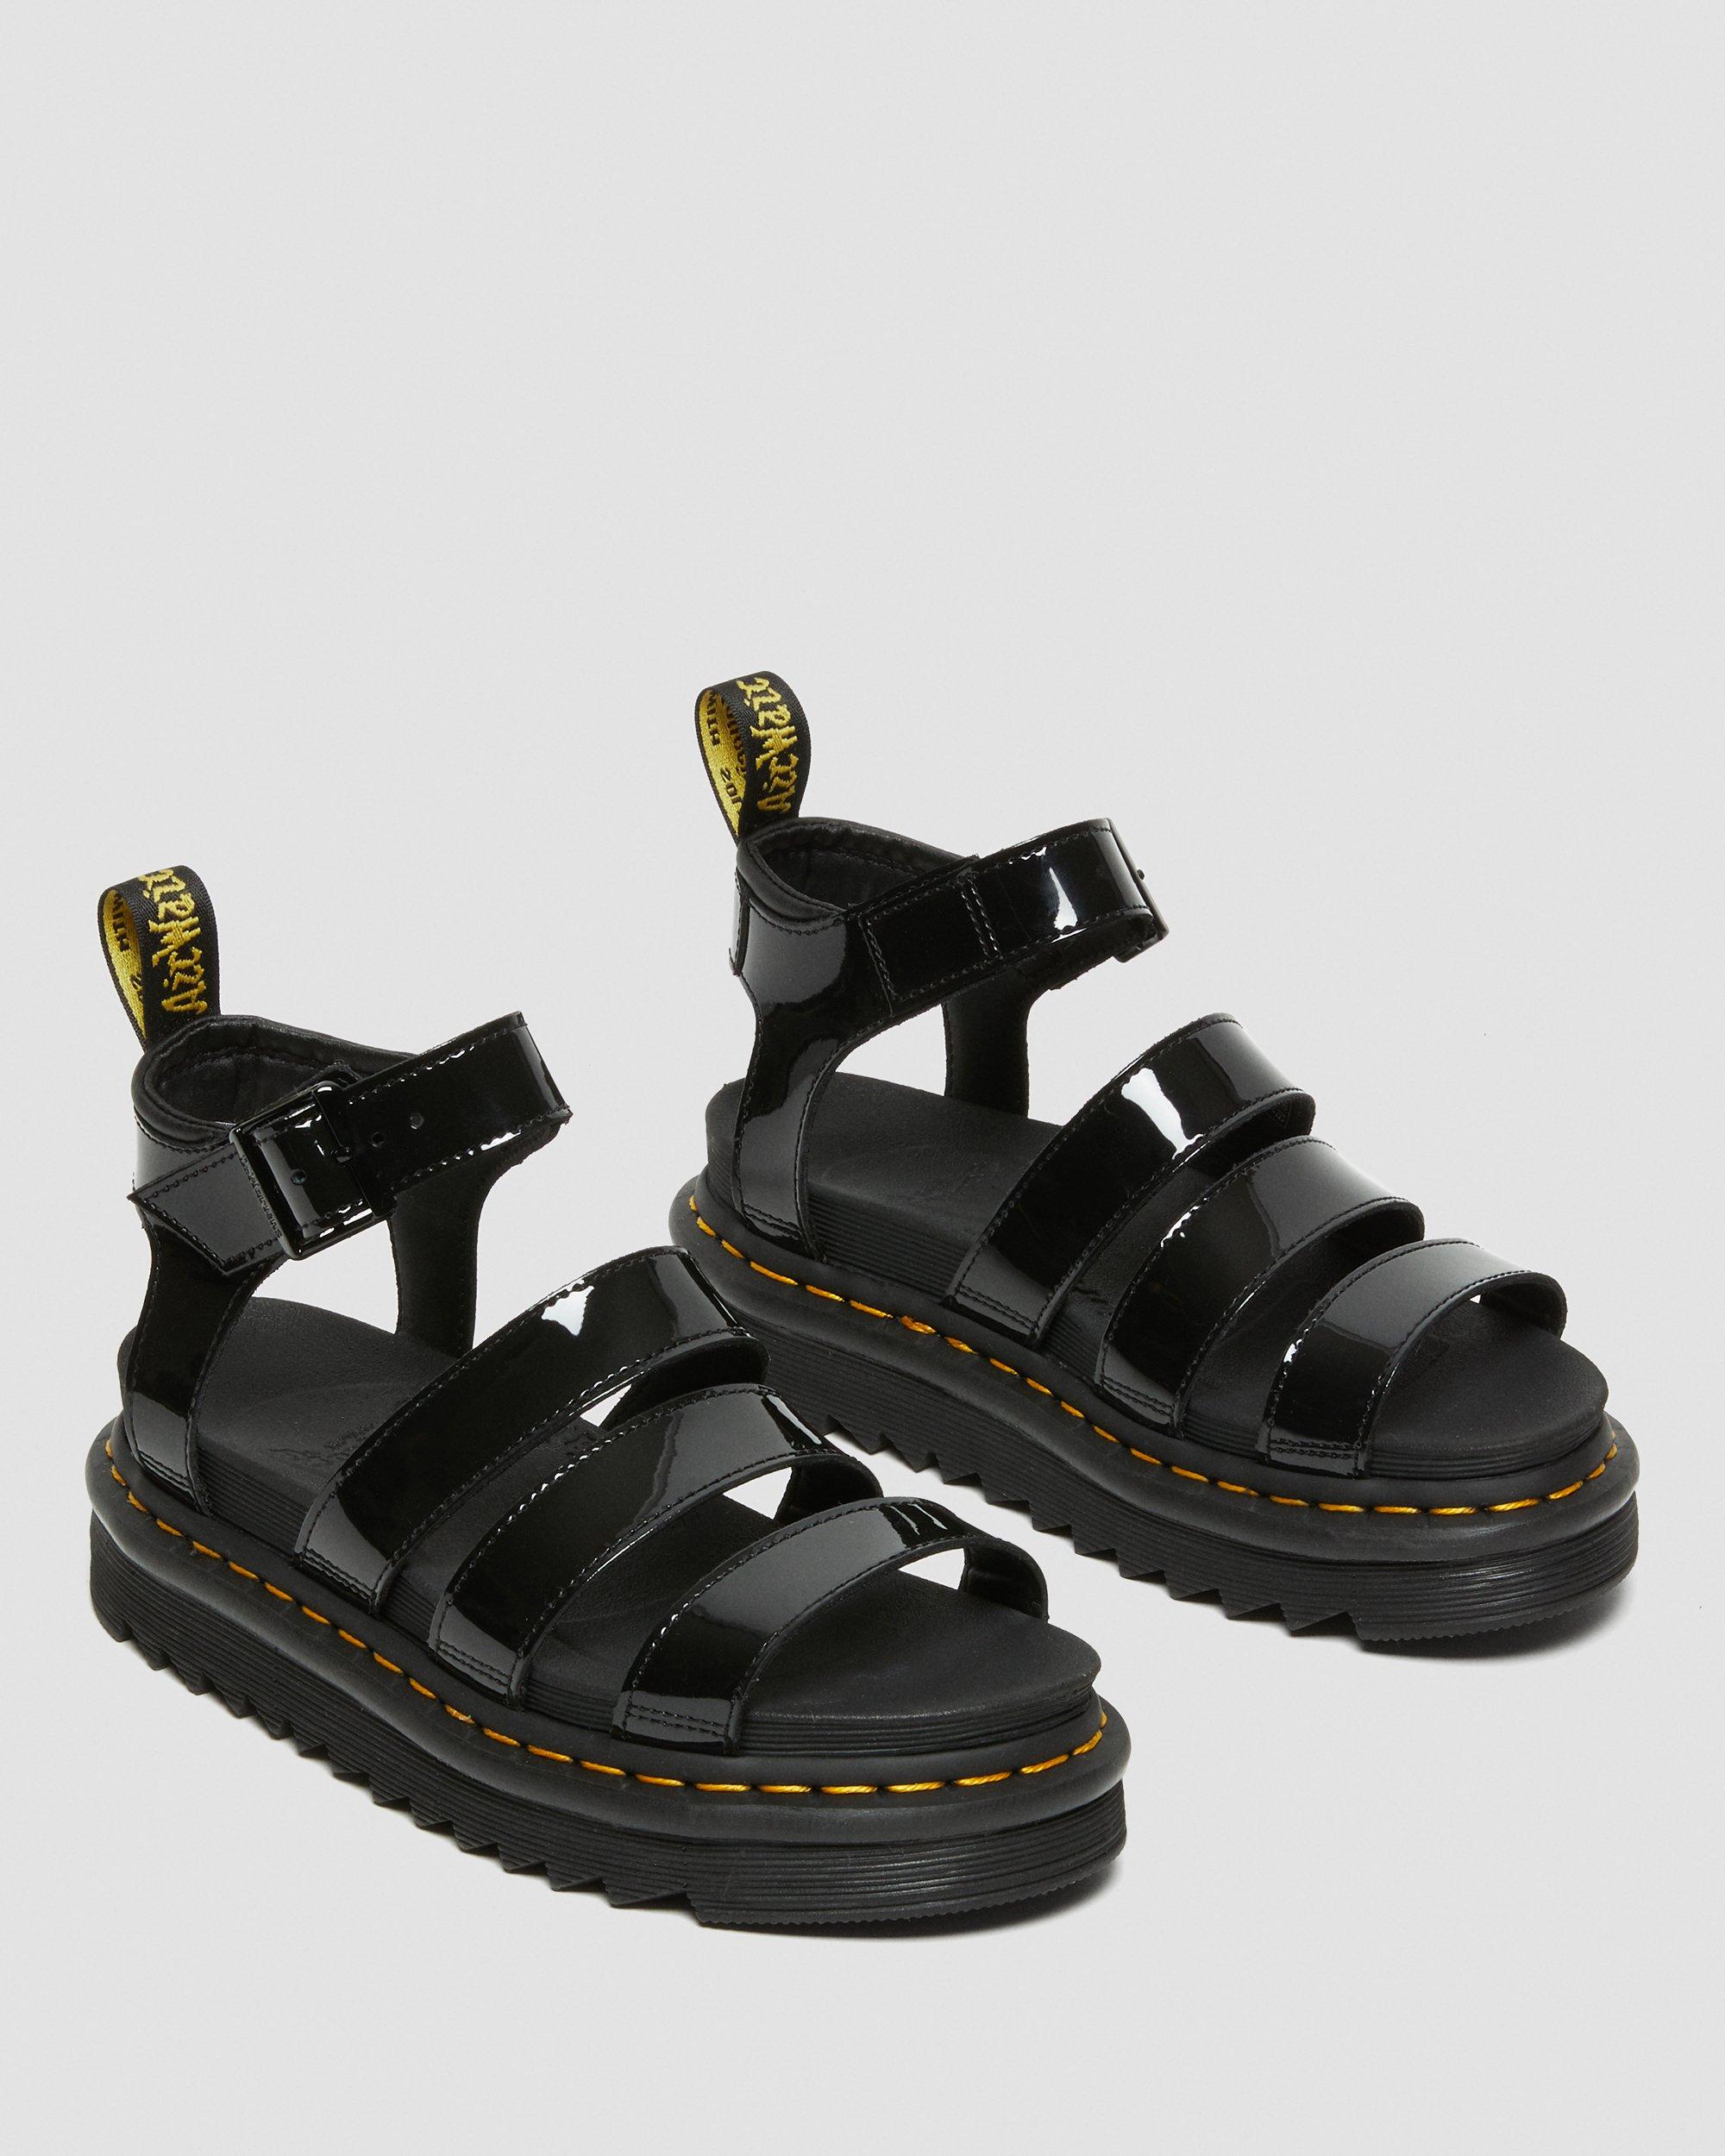 Blaire Patent Leather Gladiator Sandals in Black